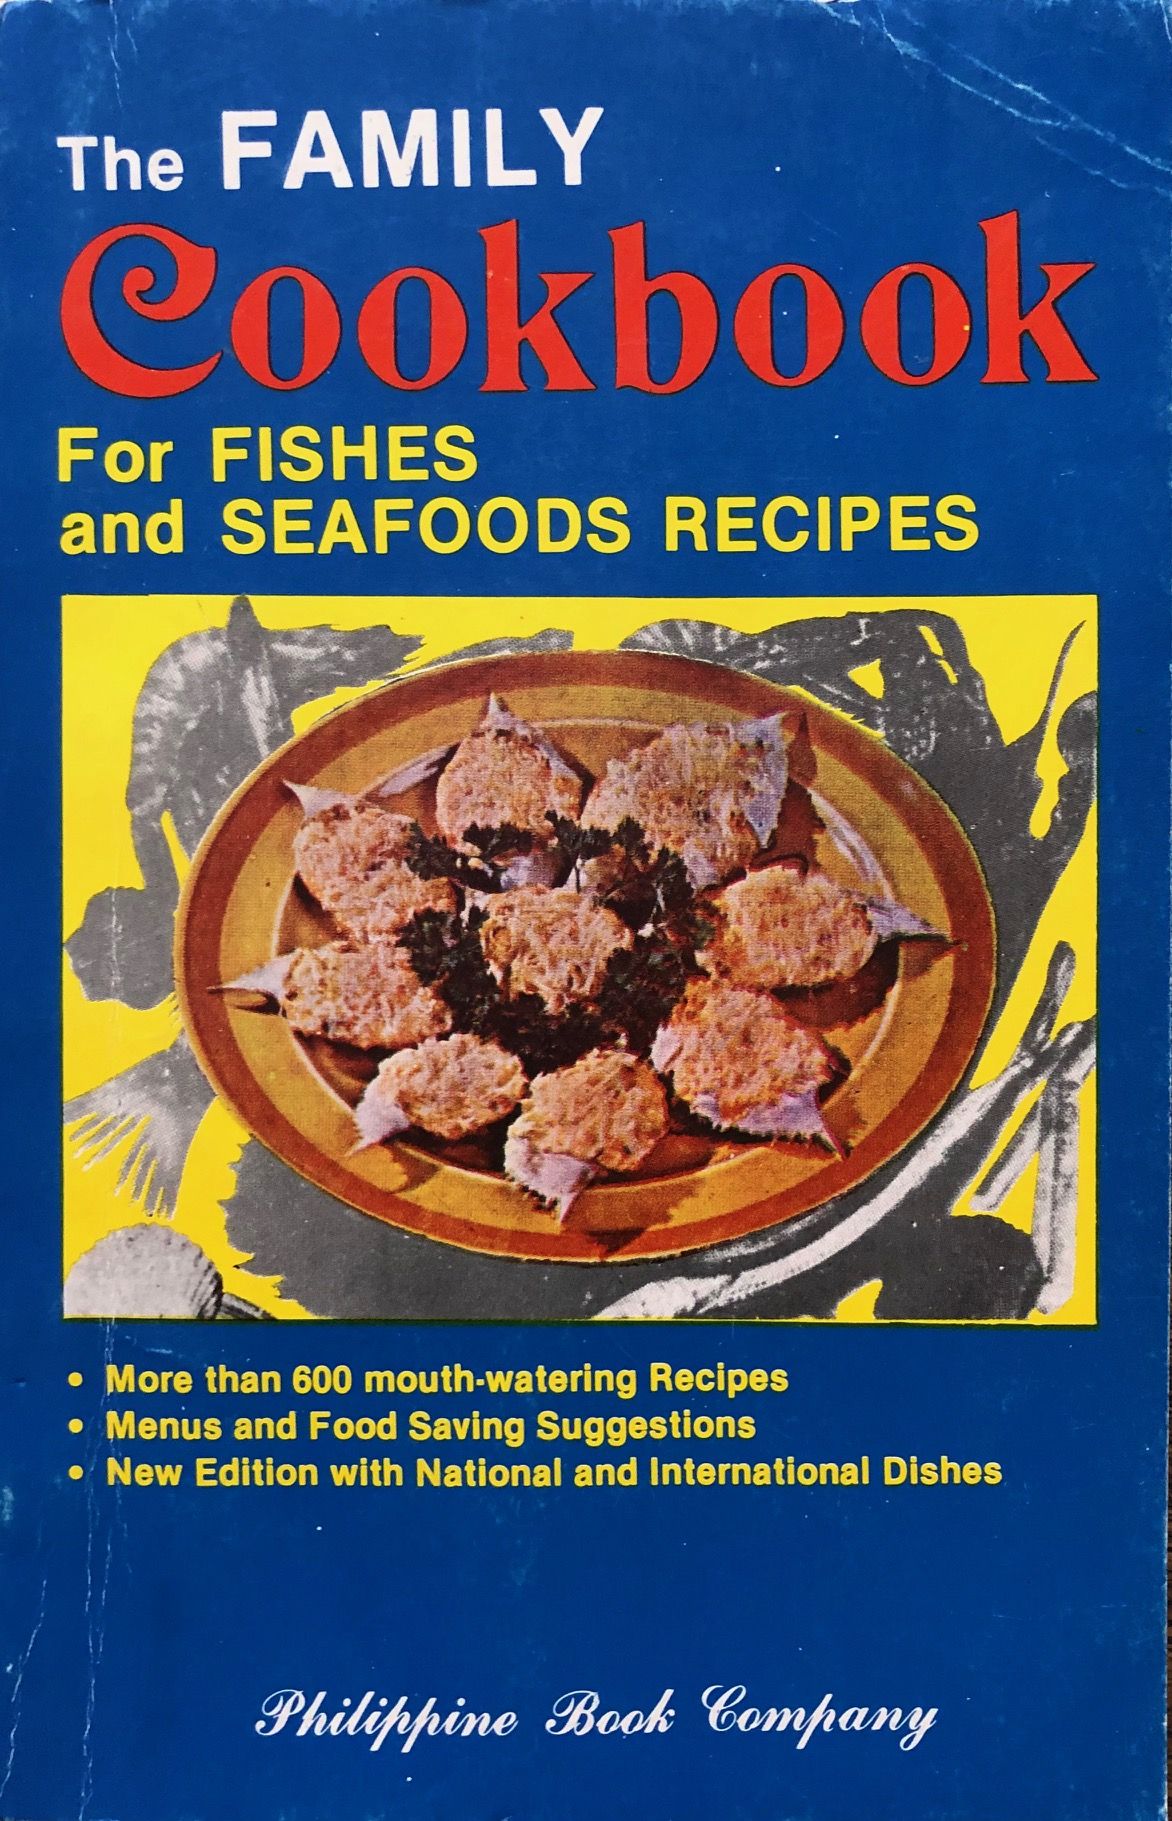 (*NEW ARRIVAL*) (Filipino) Connie Santa Maria. The Family Cookbook for Fishes and Seafood Recipes